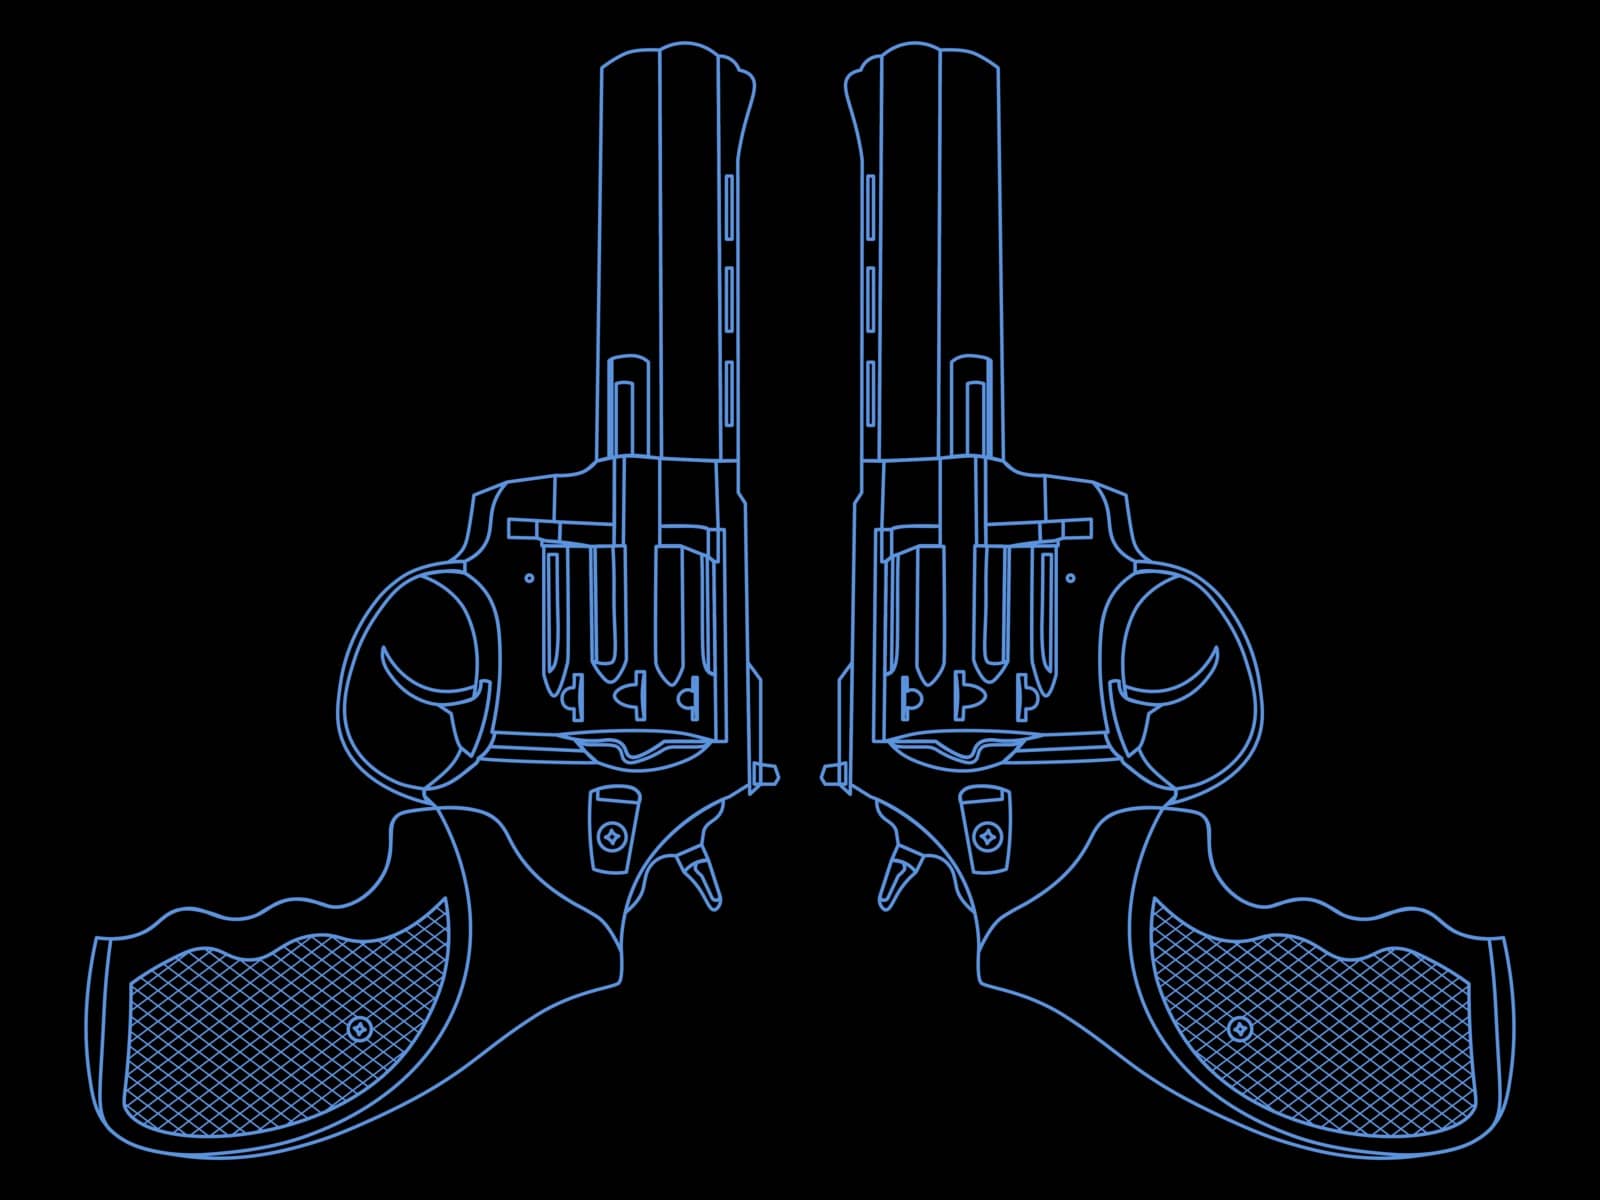 Contour illustration with two symmetric blue revolvers on black background